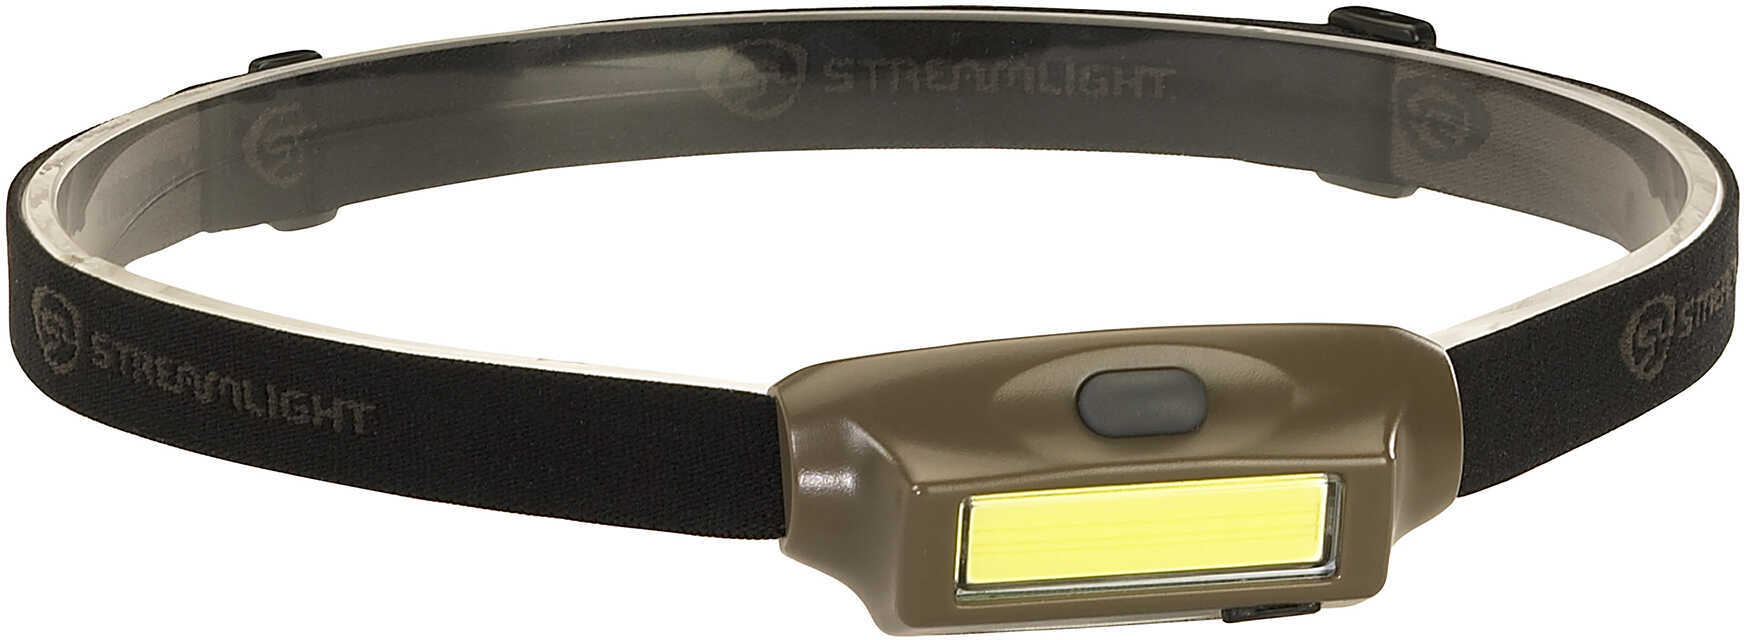 Streamlight 61706 Bandit Rechargeable Headlamp 180 Lumens Led White/Red Lithium Coyote